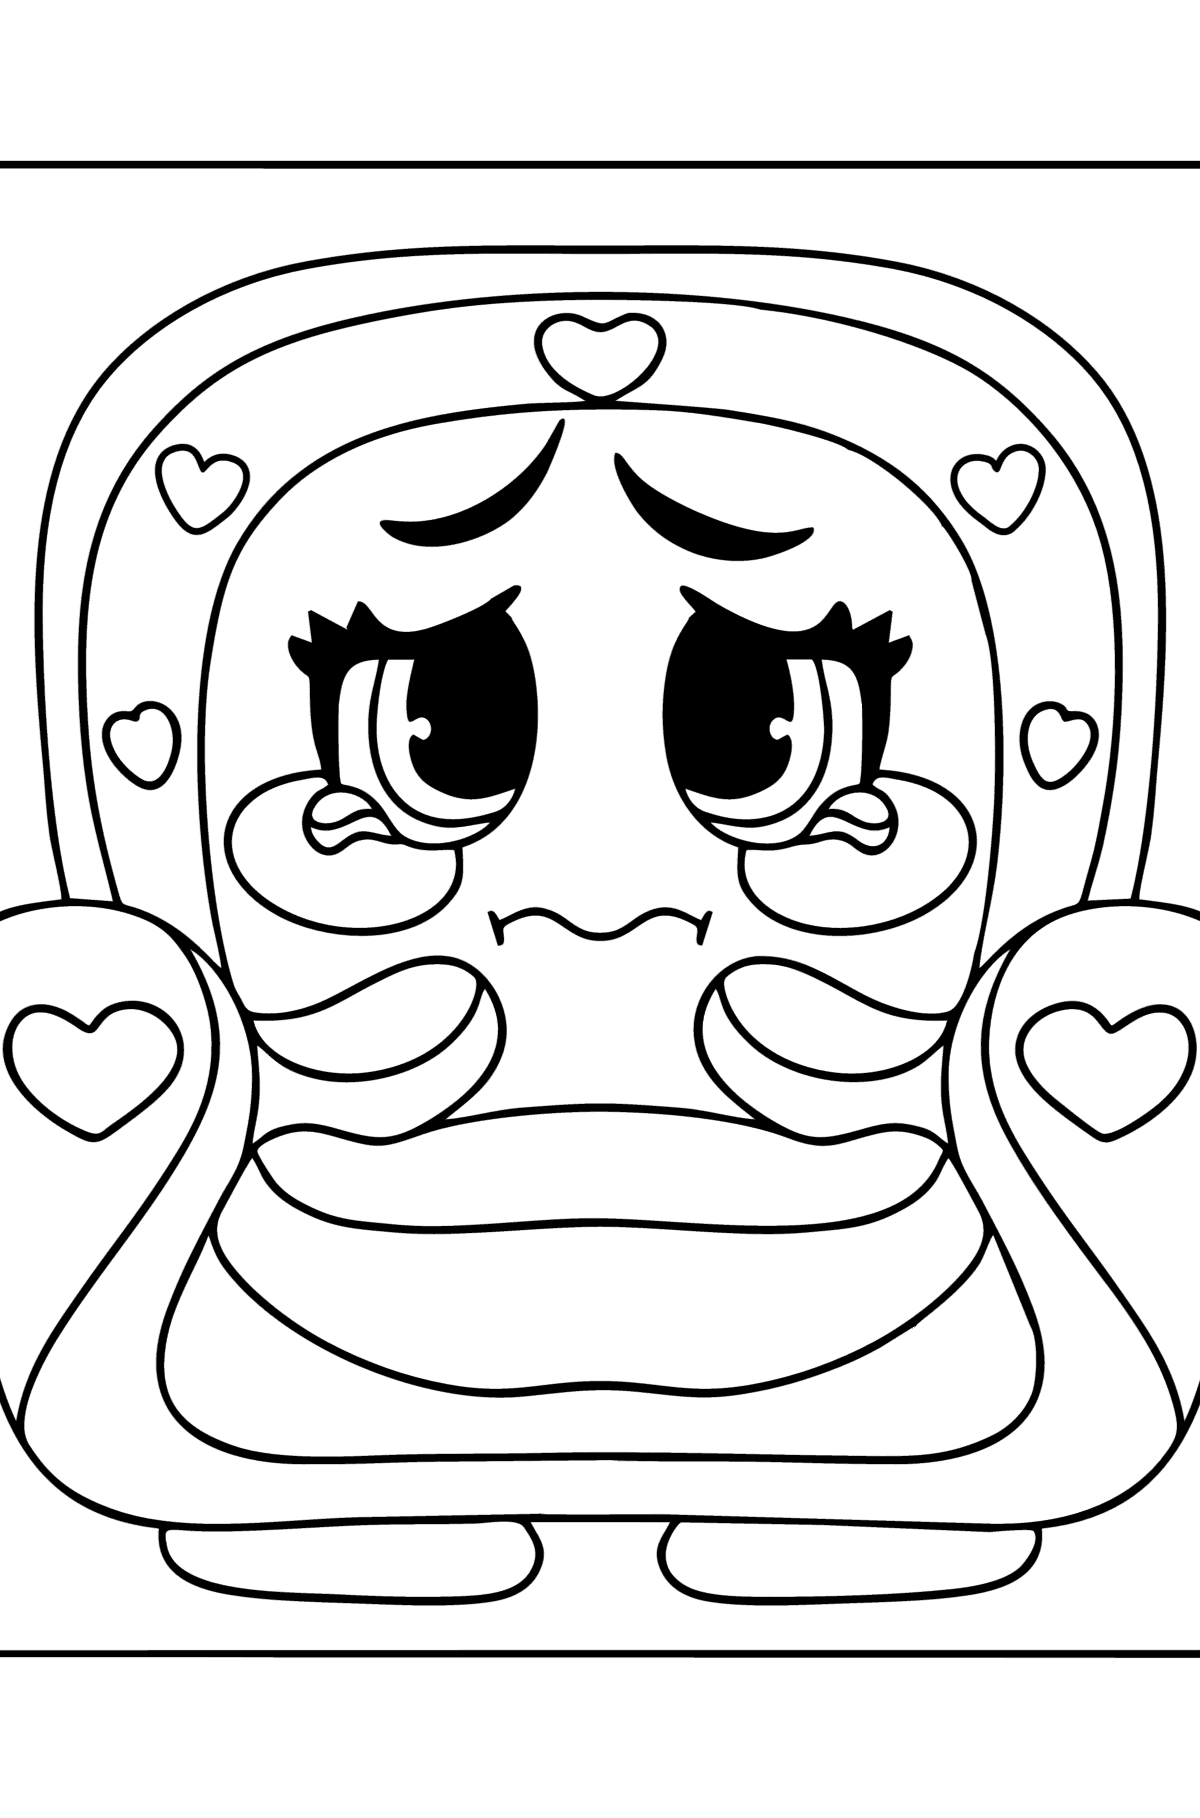 Coloring page MojiPops Sofia - Coloring Pages for Kids